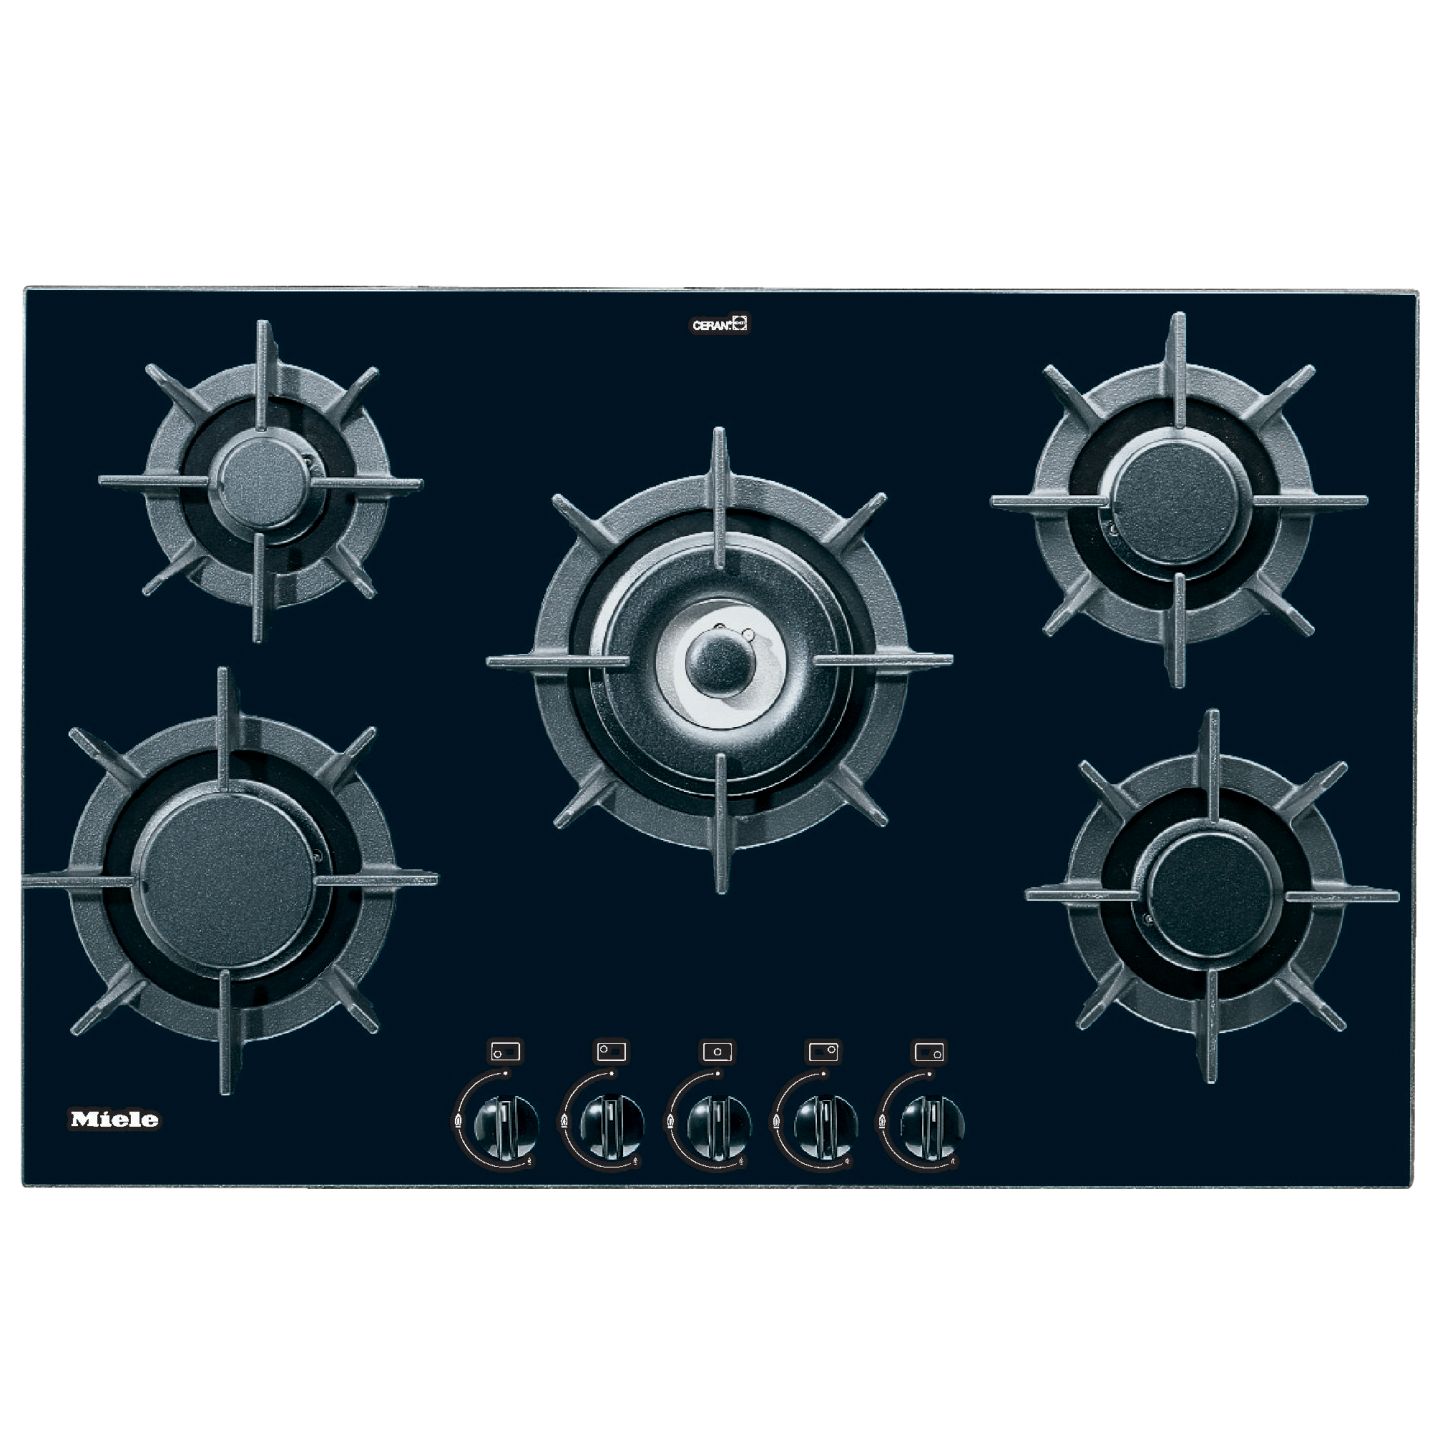 Miele KM371G Gas Hob, Black/Stainless Steel at John Lewis